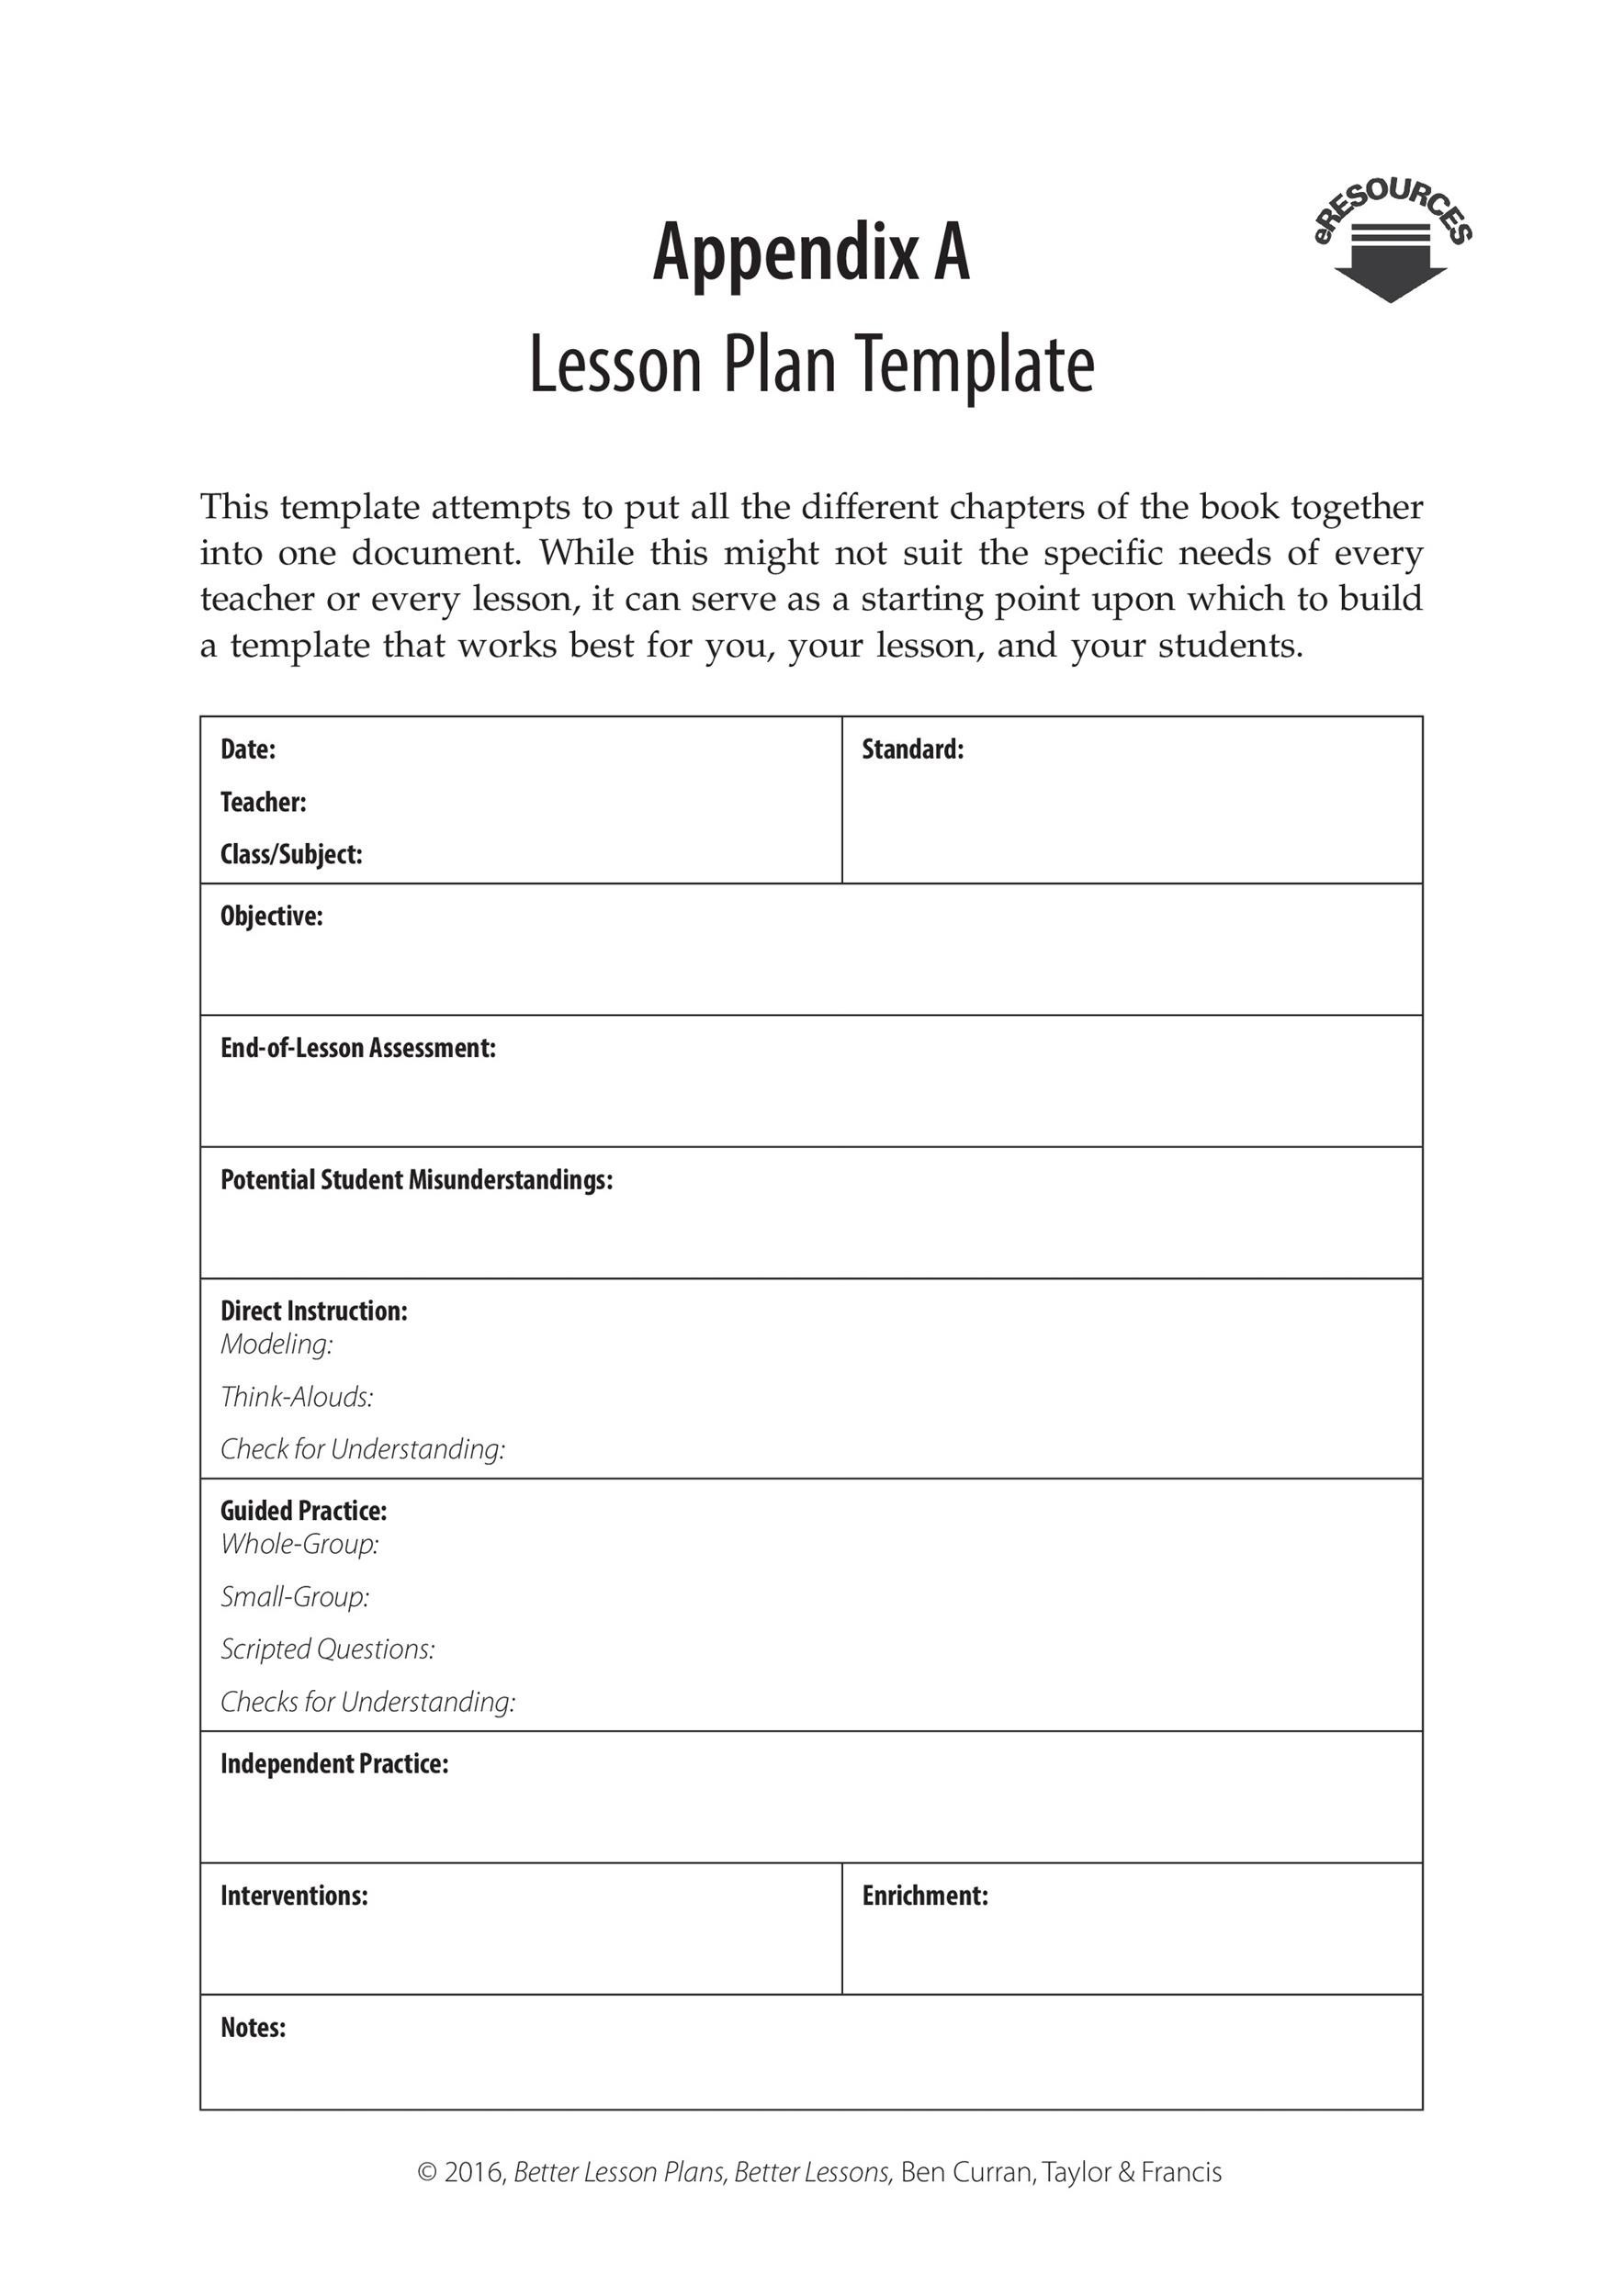 Free lesson plan template 43